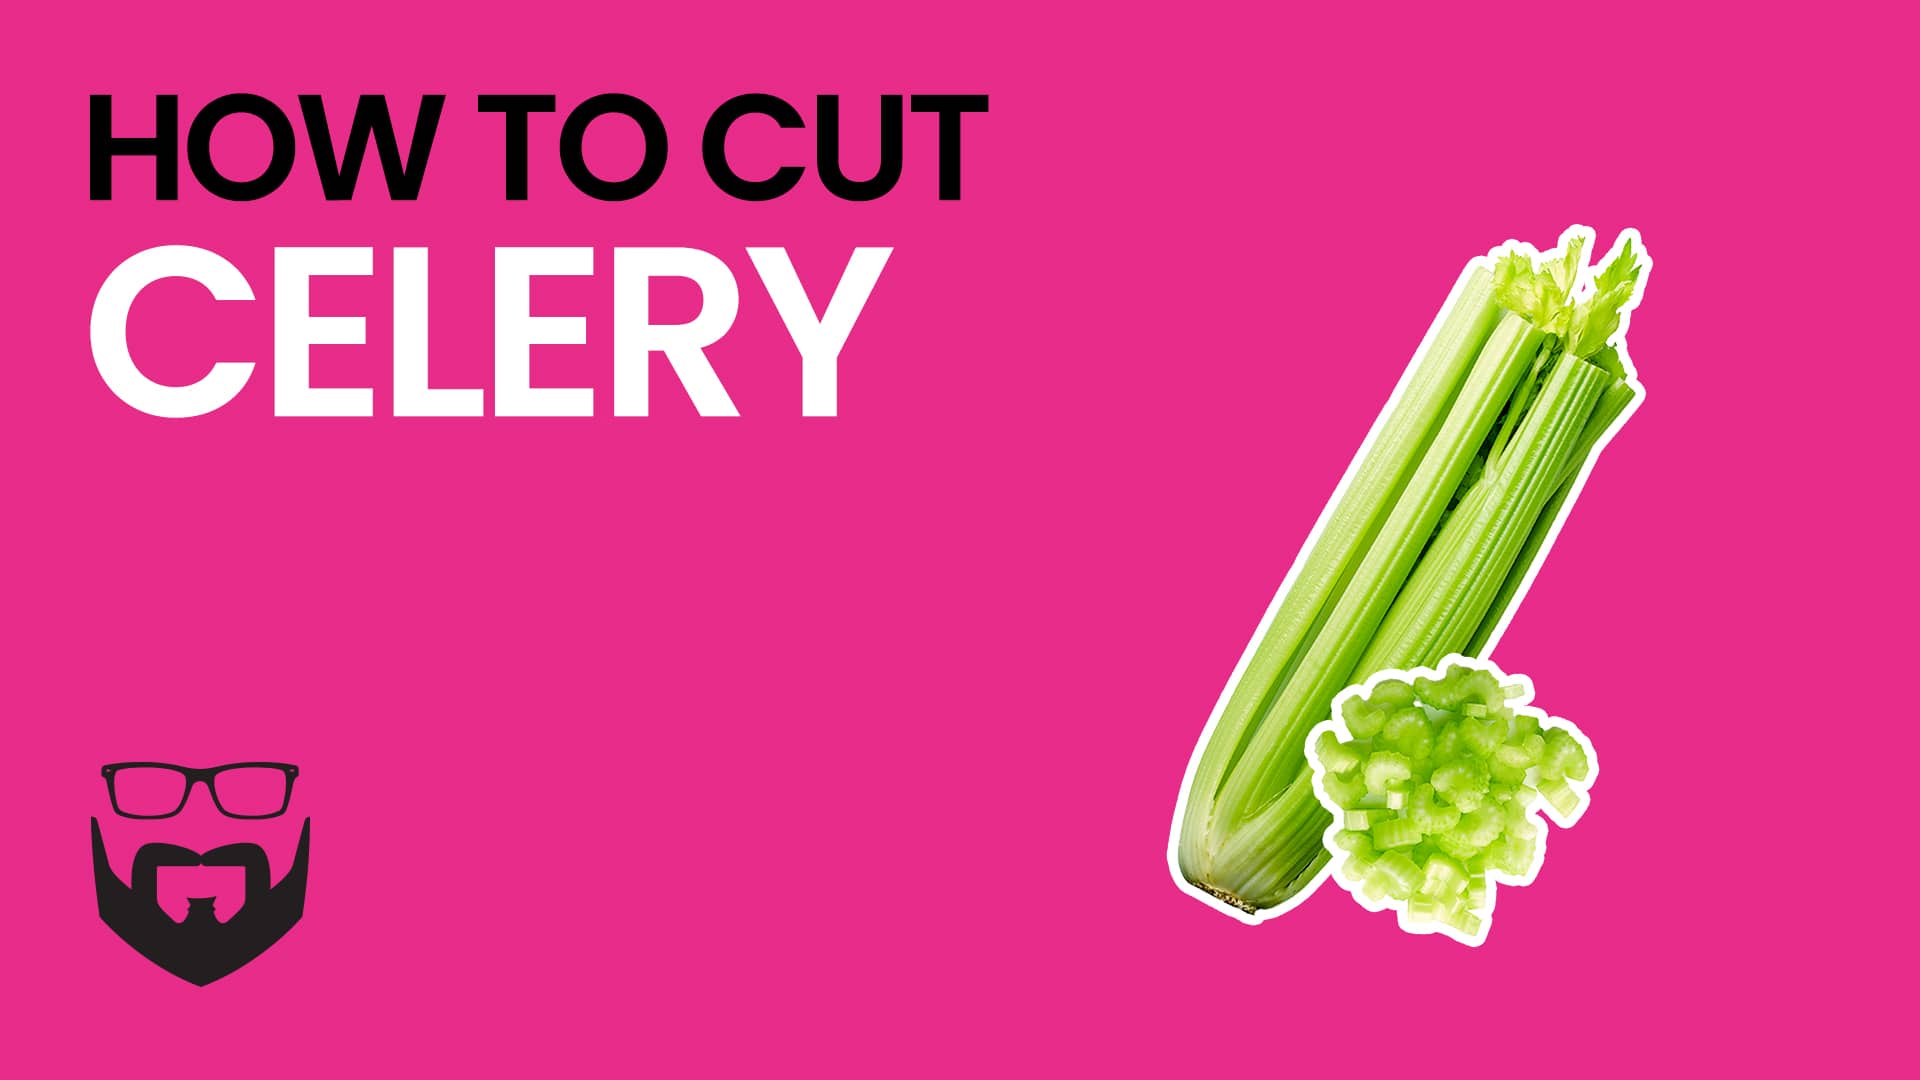 How to Cut Celery Video - Pink